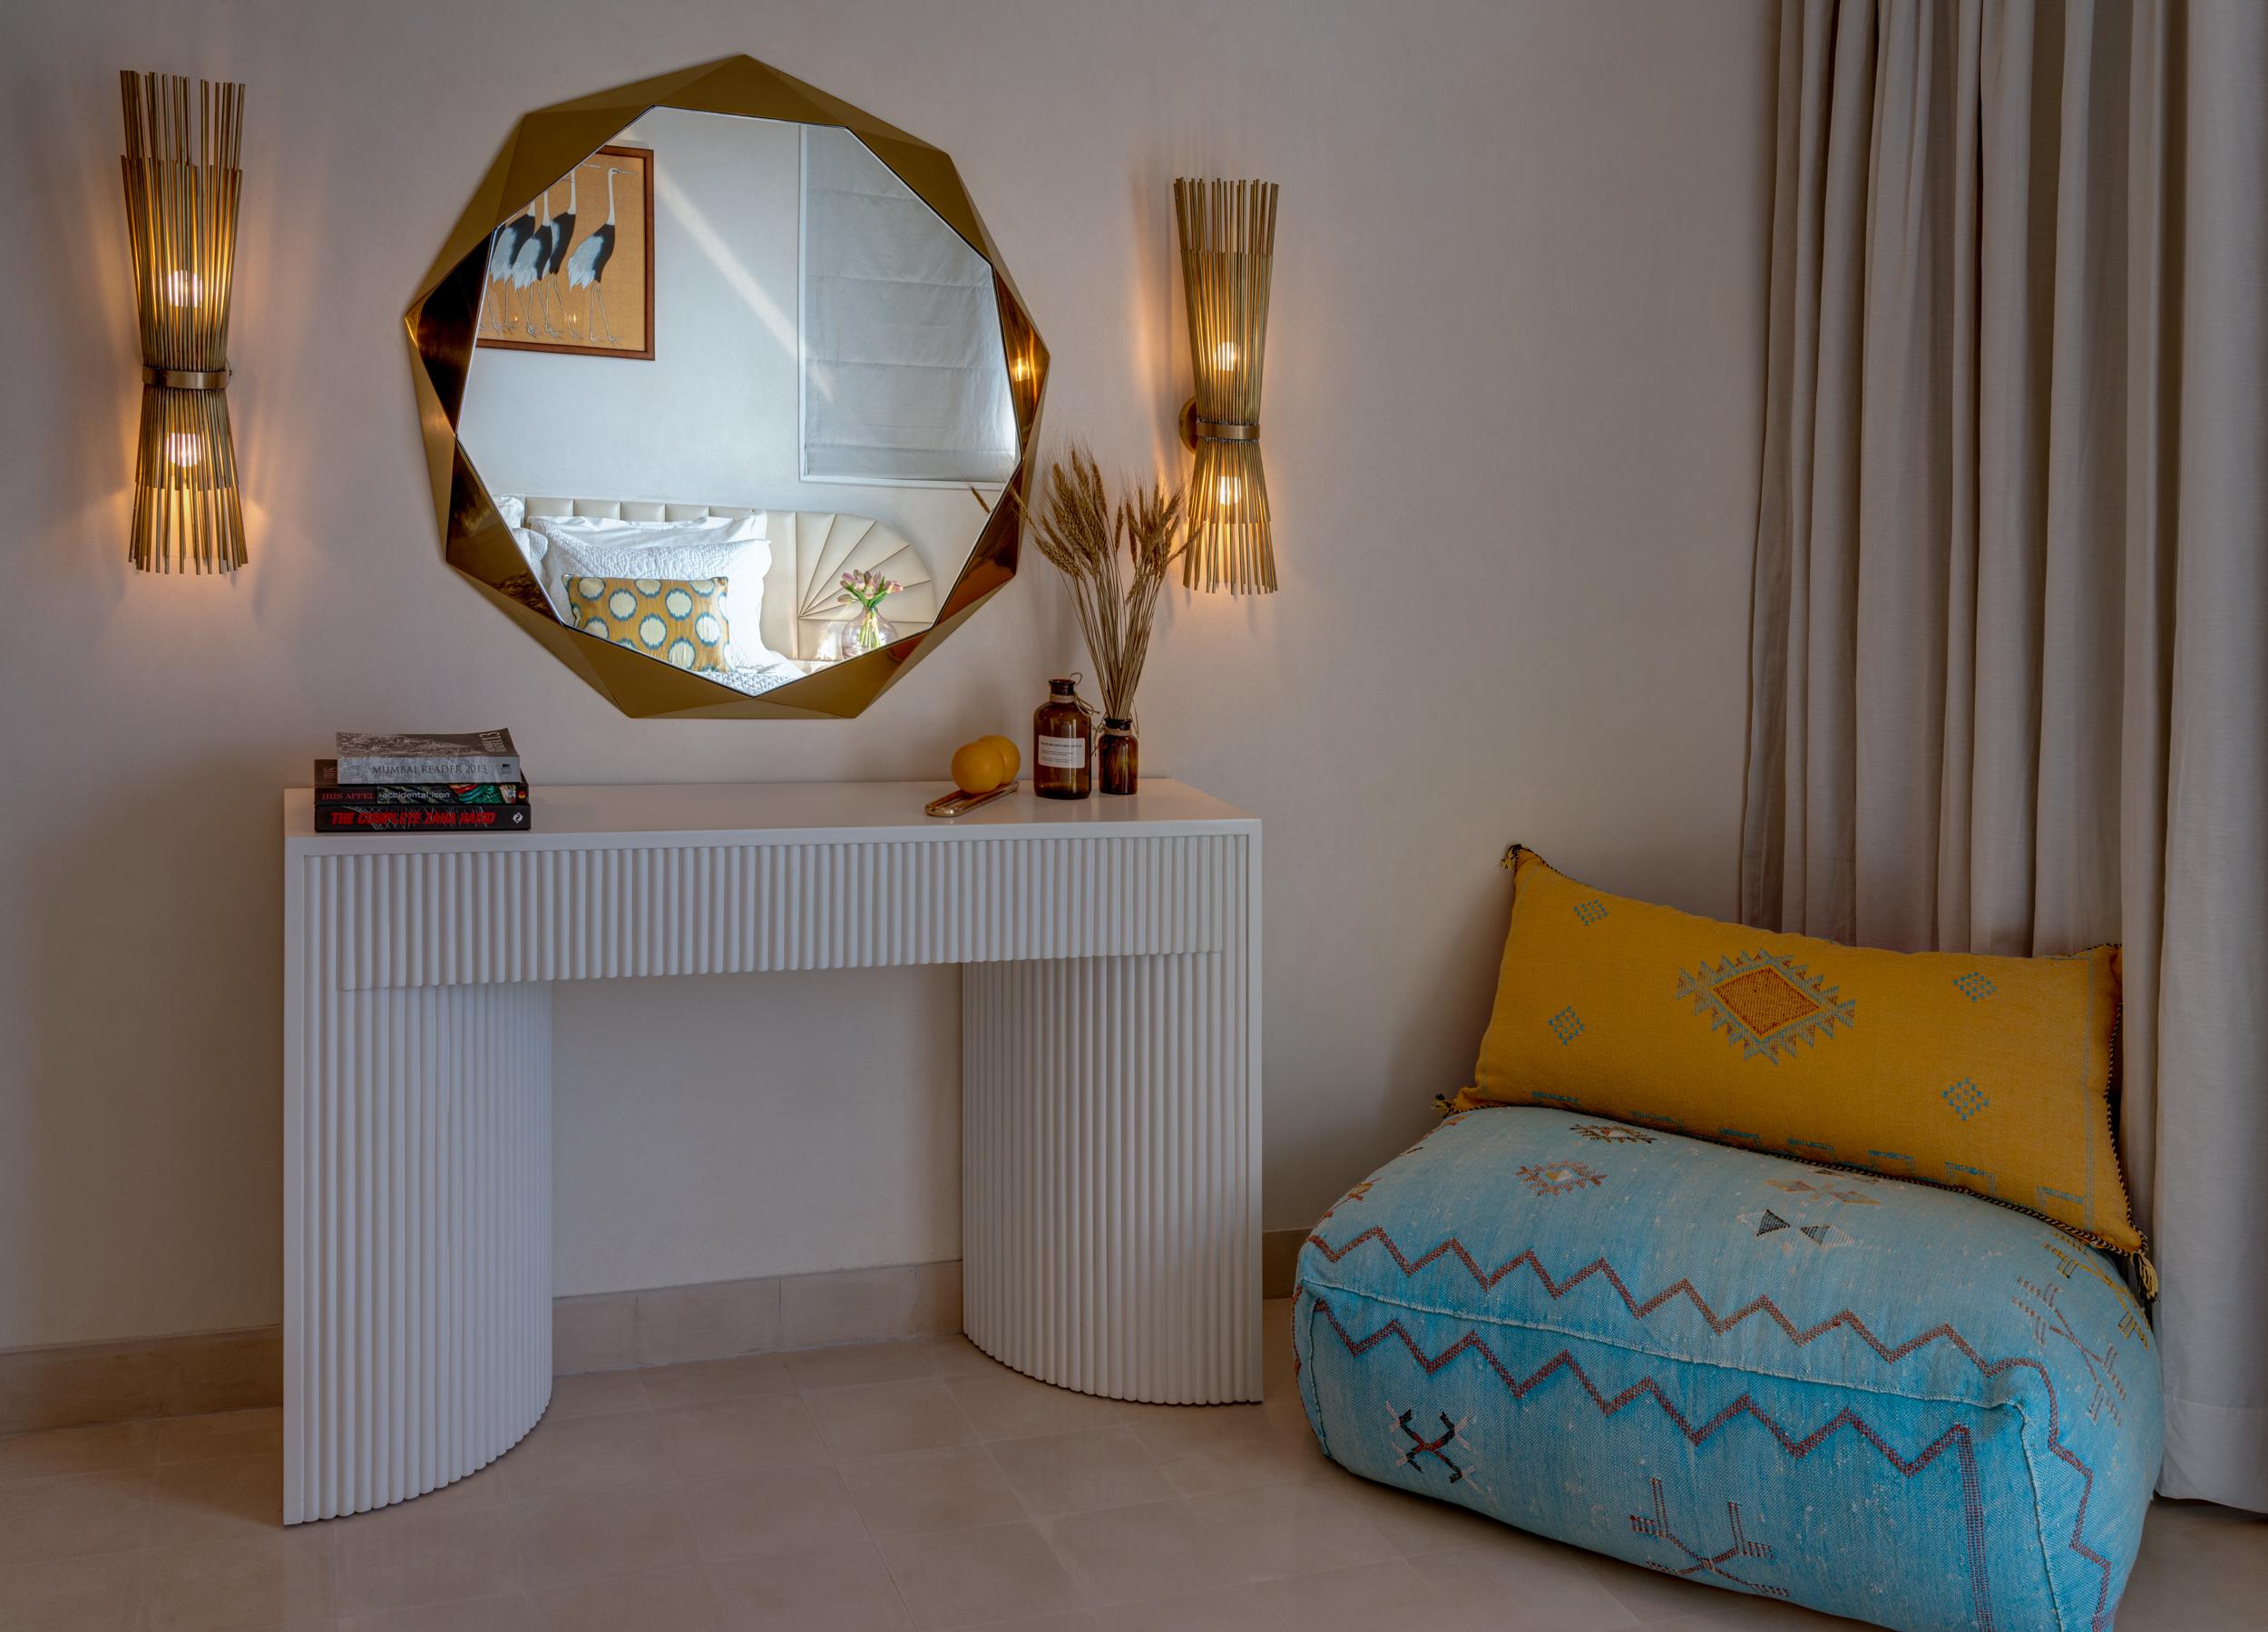 Stella Large Wall Console Mirror Gold by Nika Zupanc is a gorgeous mirror with starry edges in rose gold or gold. A statement piece in any interior space.

Nika Zupanc, a strikingly renowned Slovenian designer, never shies away from redefining the